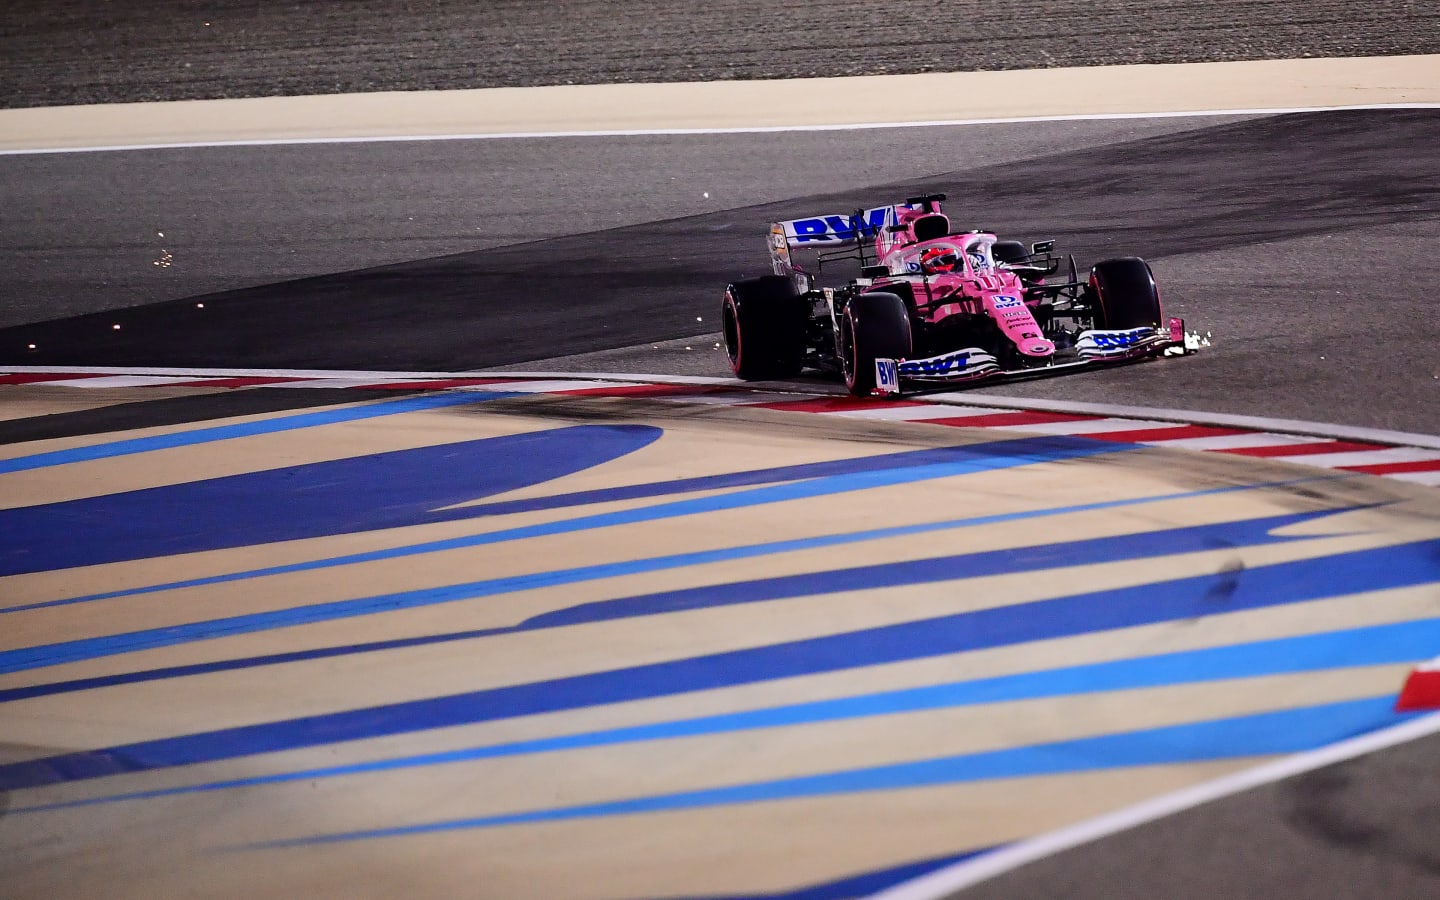 BAHRAIN, BAHRAIN - DECEMBER 05: Sergio Perez of Mexico driving the (11) Racing Point RP20 Mercedes on track during qualifying ahead of the F1 Grand Prix of Sakhir at Bahrain International Circuit on December 05, 2020 in Bahrain, Bahrain. (Photo by Giuseppe Cacace - Pool/Getty Images)